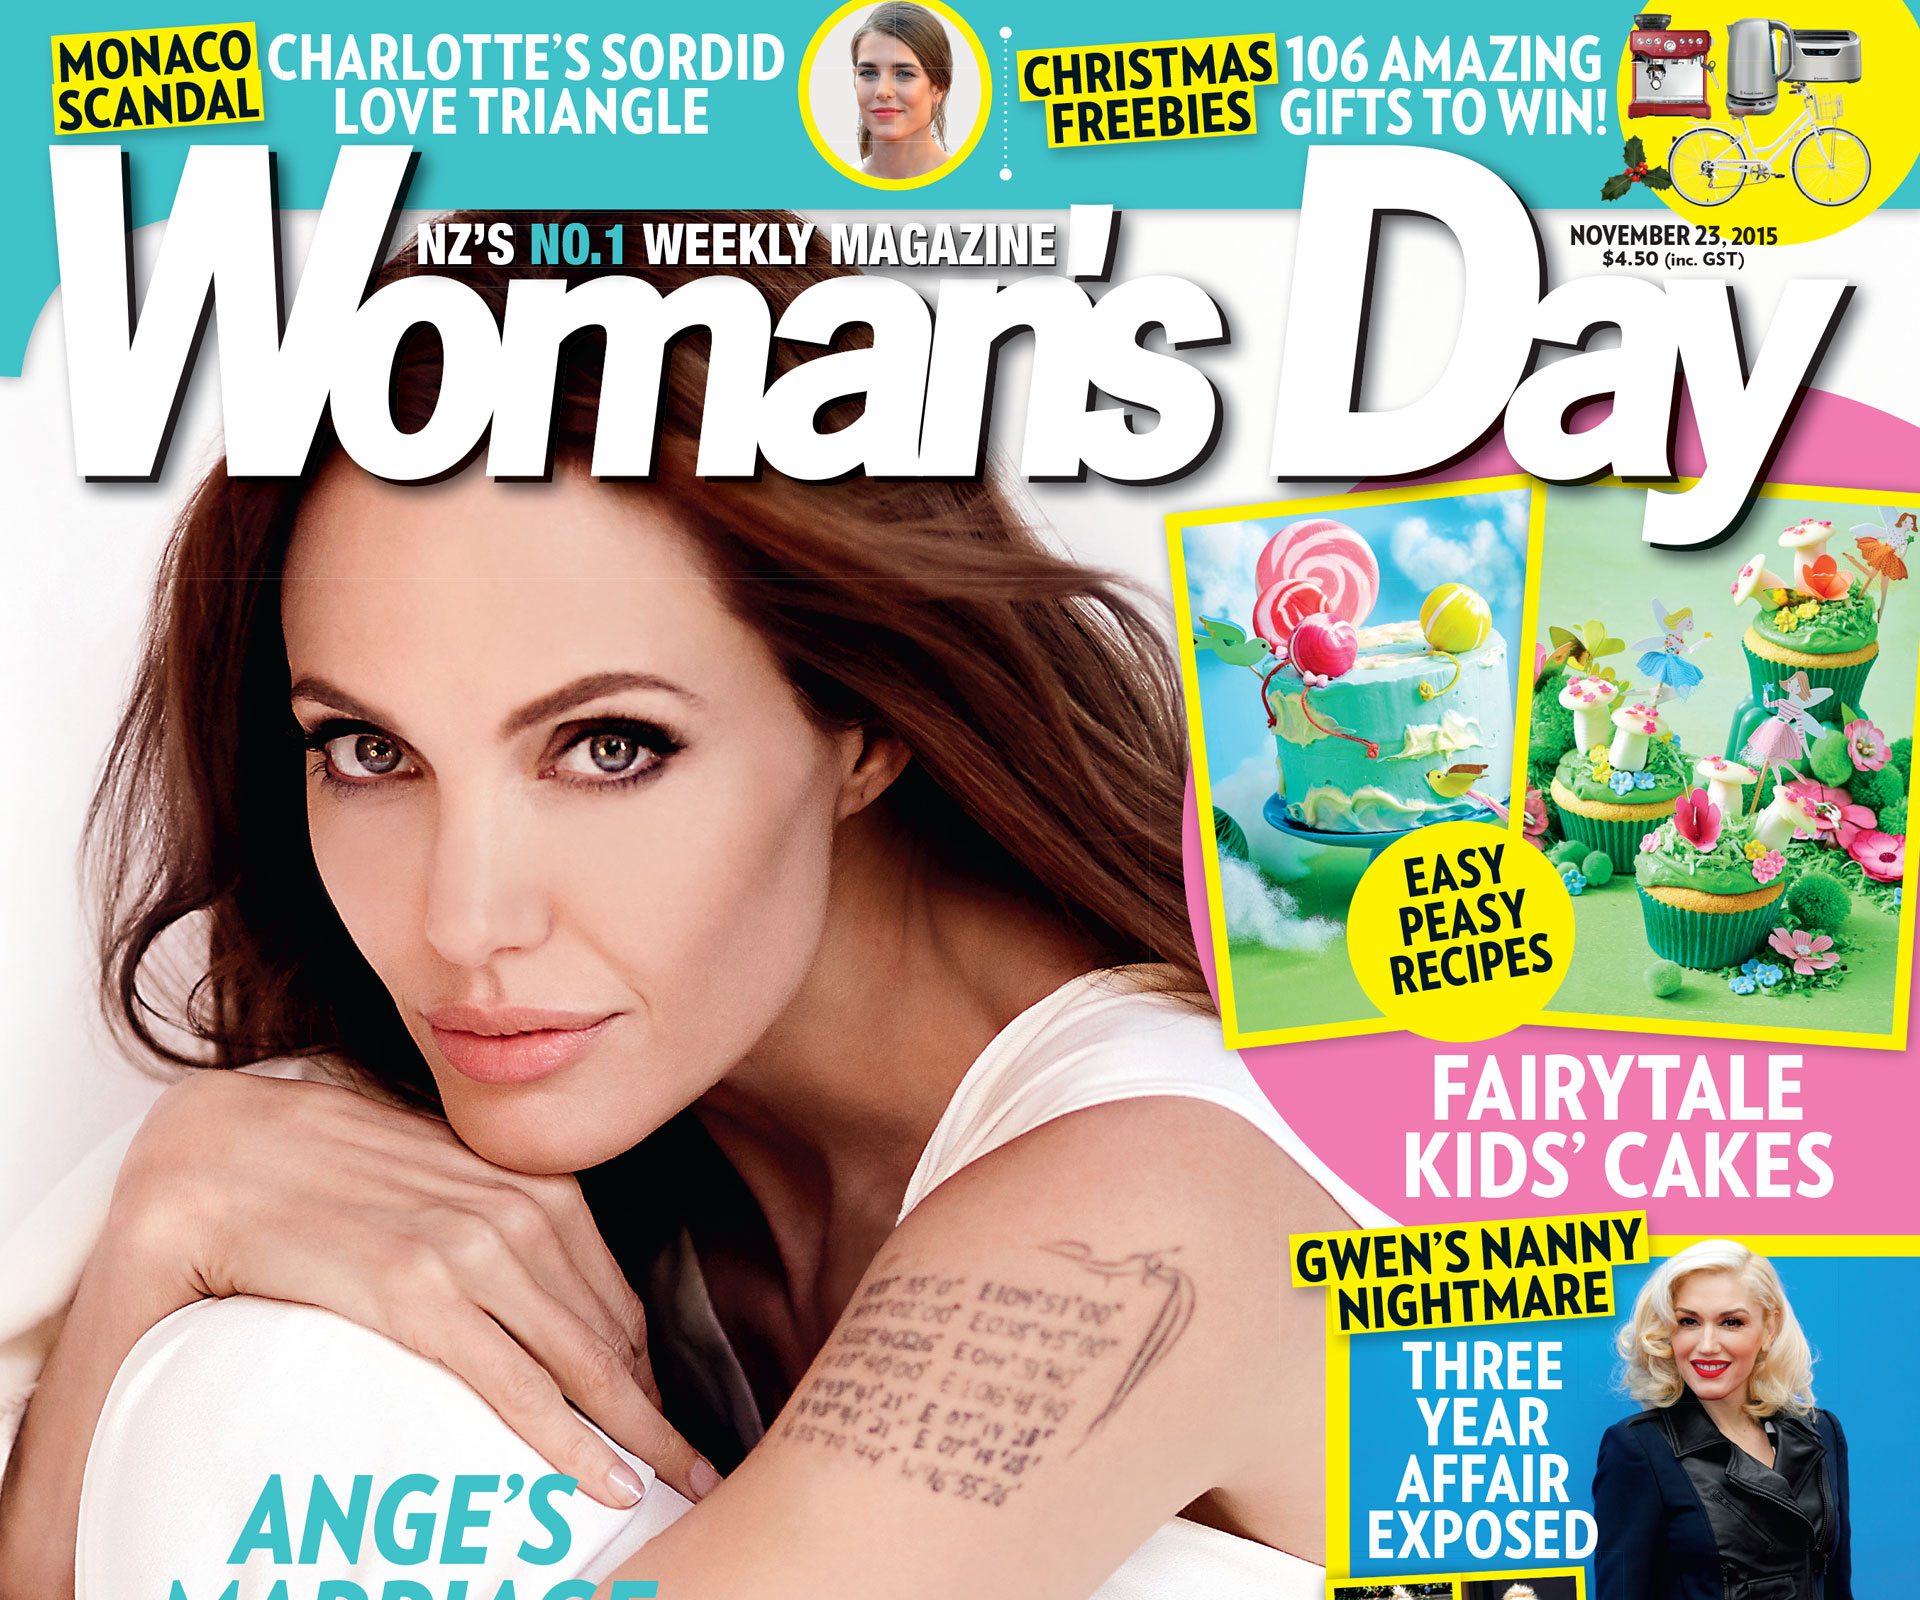 Issue 47: This week in Woman’s Day